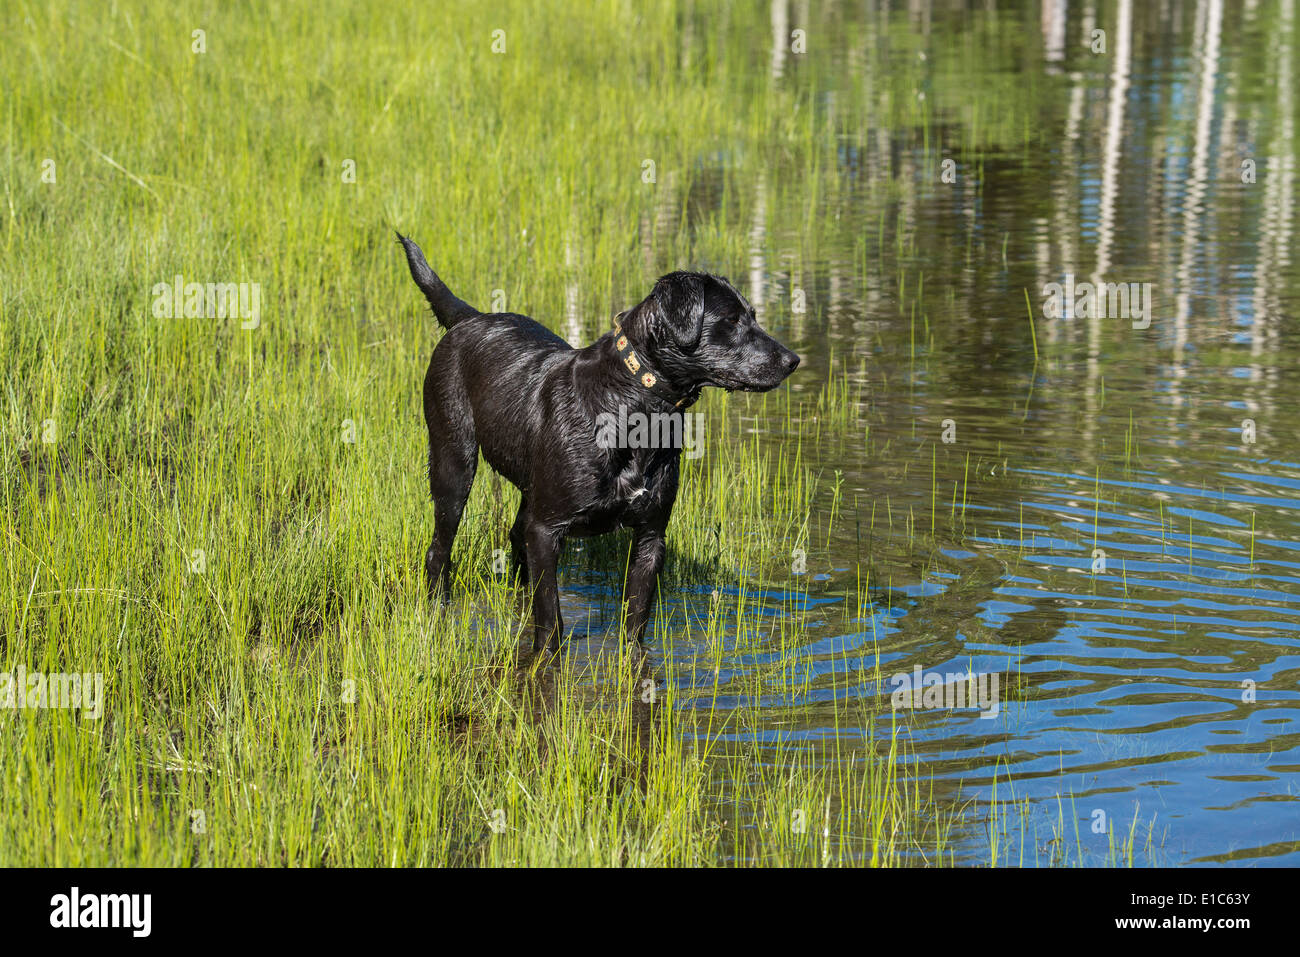 A black labrador dog on the edge of standing water. Stock Photo